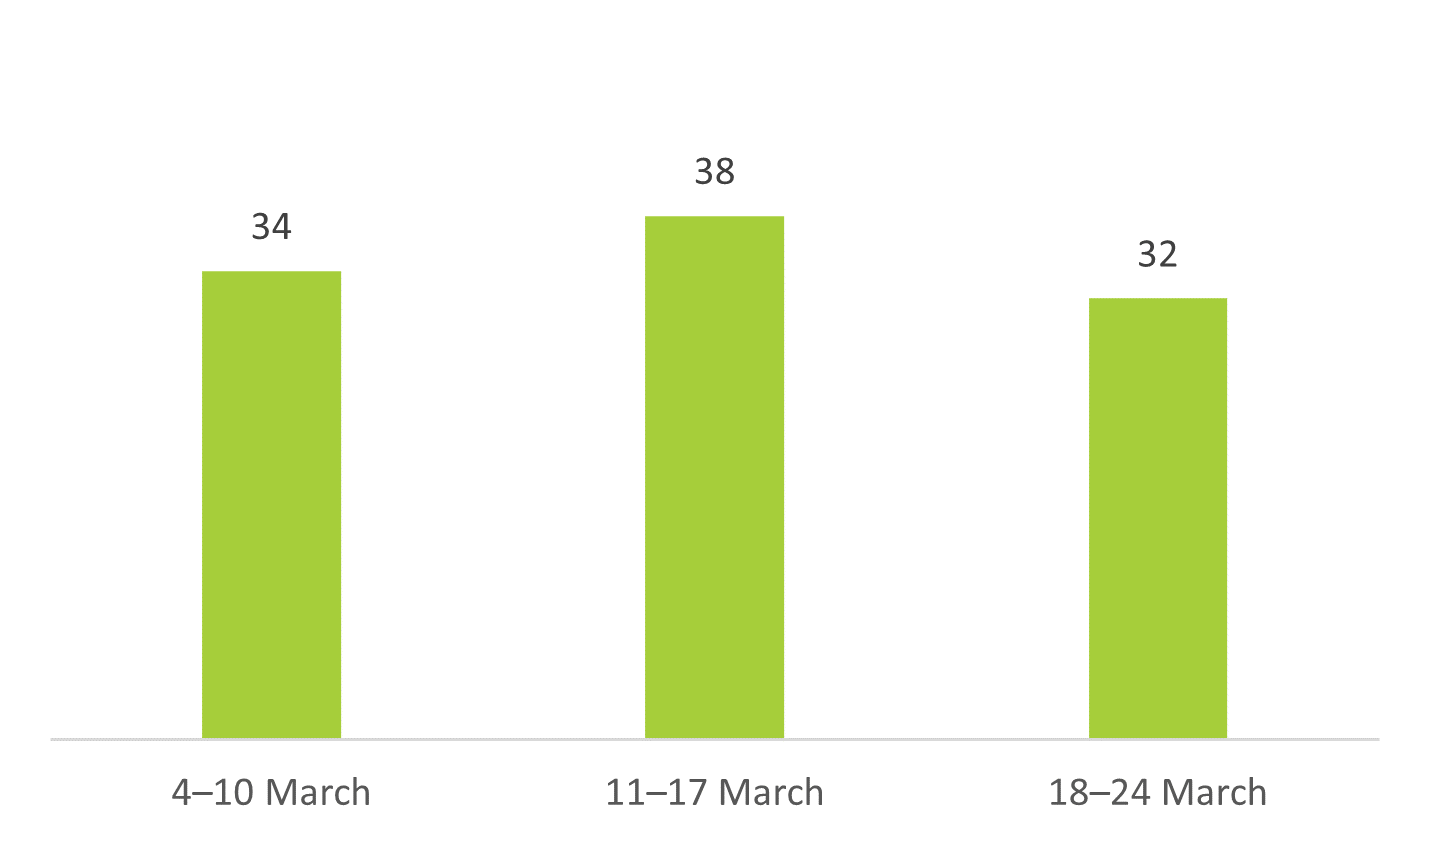 Figure 3: Vaccine hesitancy around the time of AstraZeneca suspensions (%), EU27, March 2021, 18 to 24 March 32%, 11 to 17 March 38%, 4 to 10 March 34%